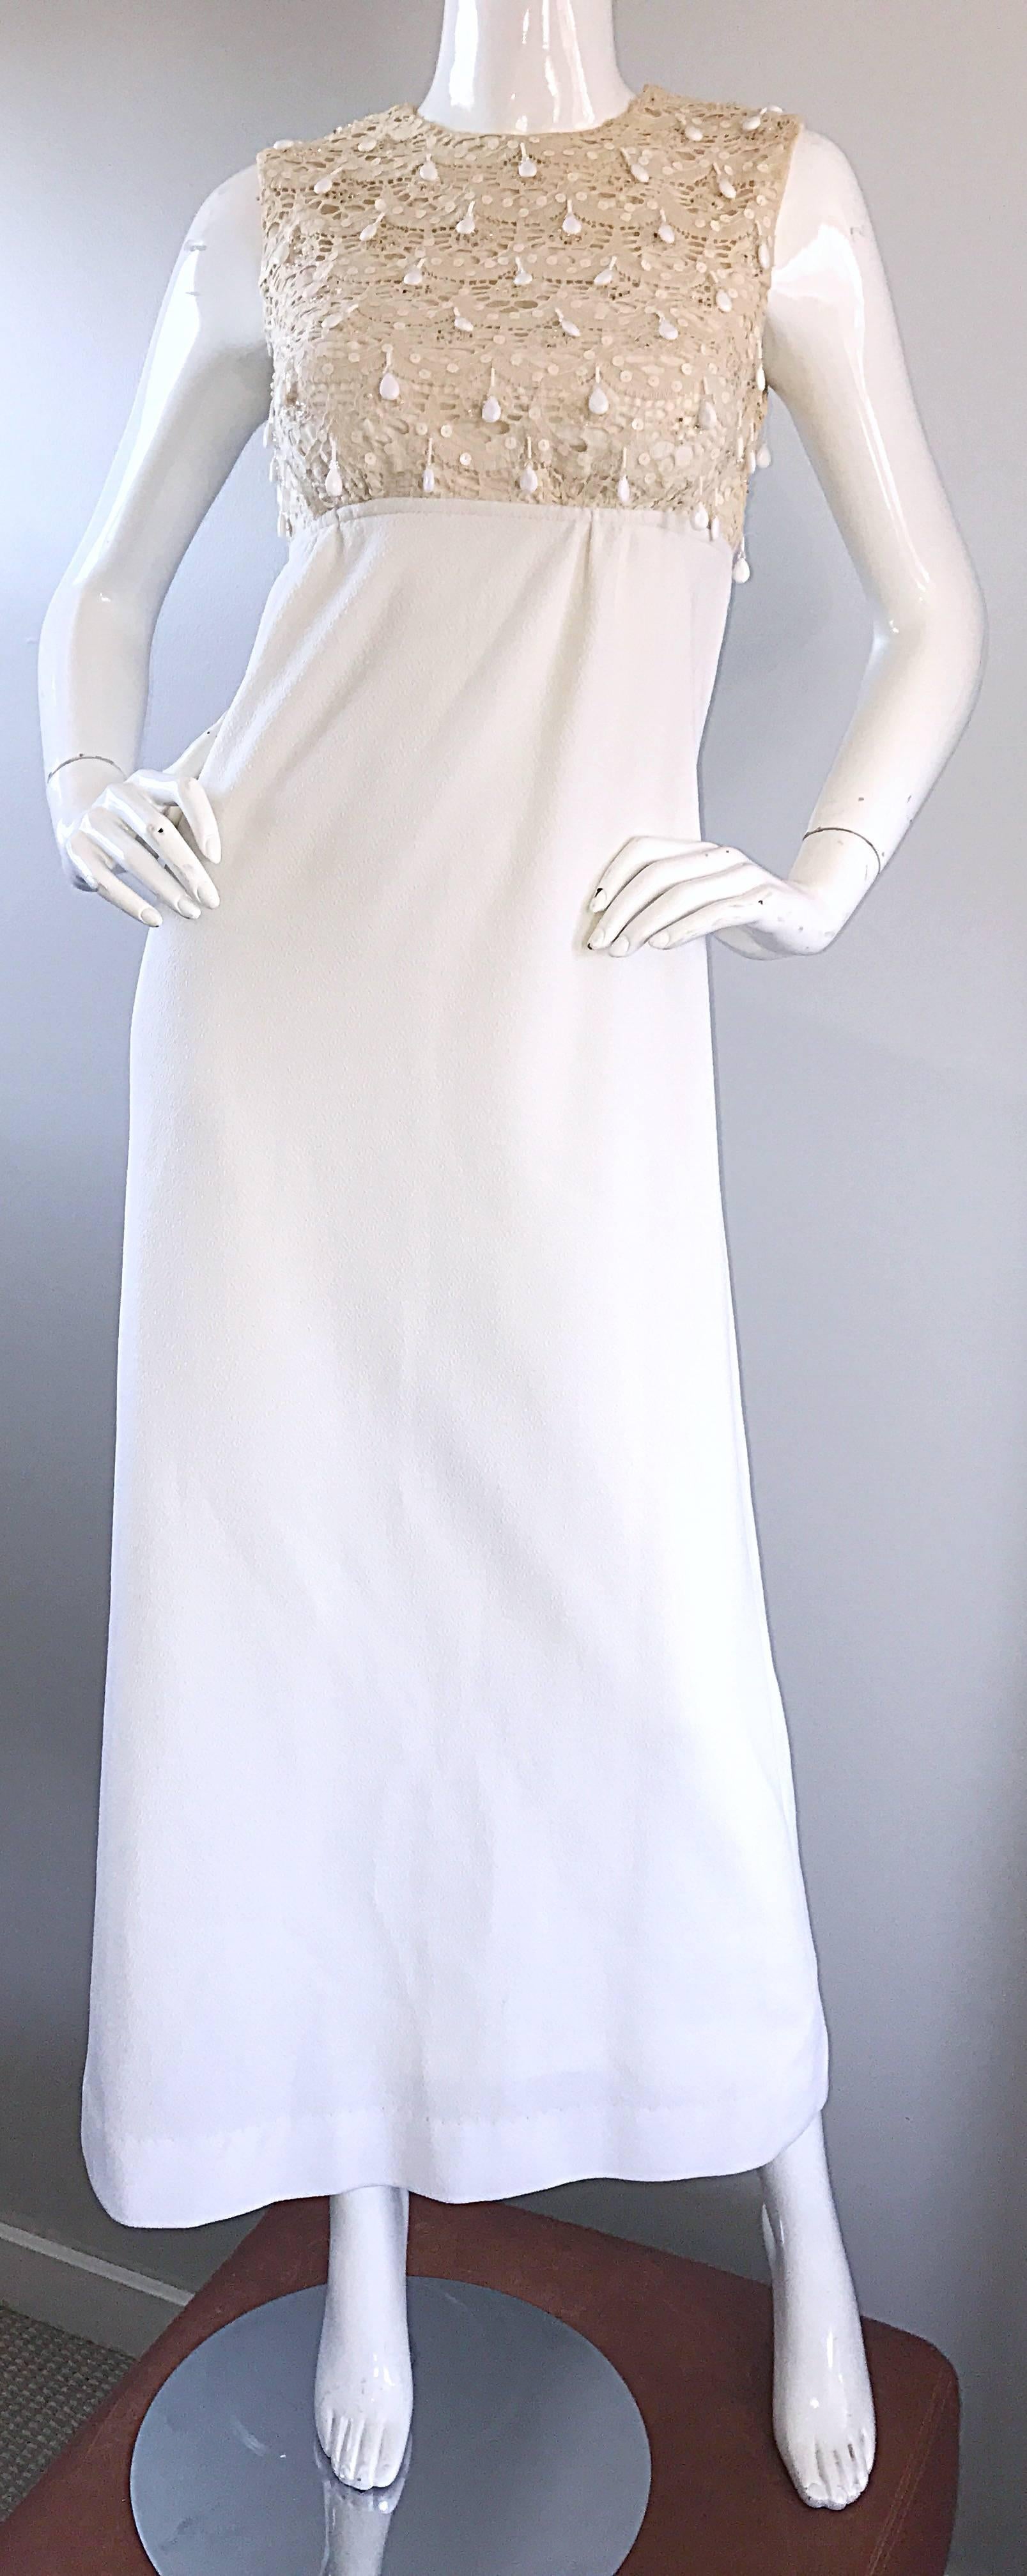 1960s Jack Bryan Ivory and White Crochet Lace Beaded Vintage Maxi Dress / Gown  For Sale 1